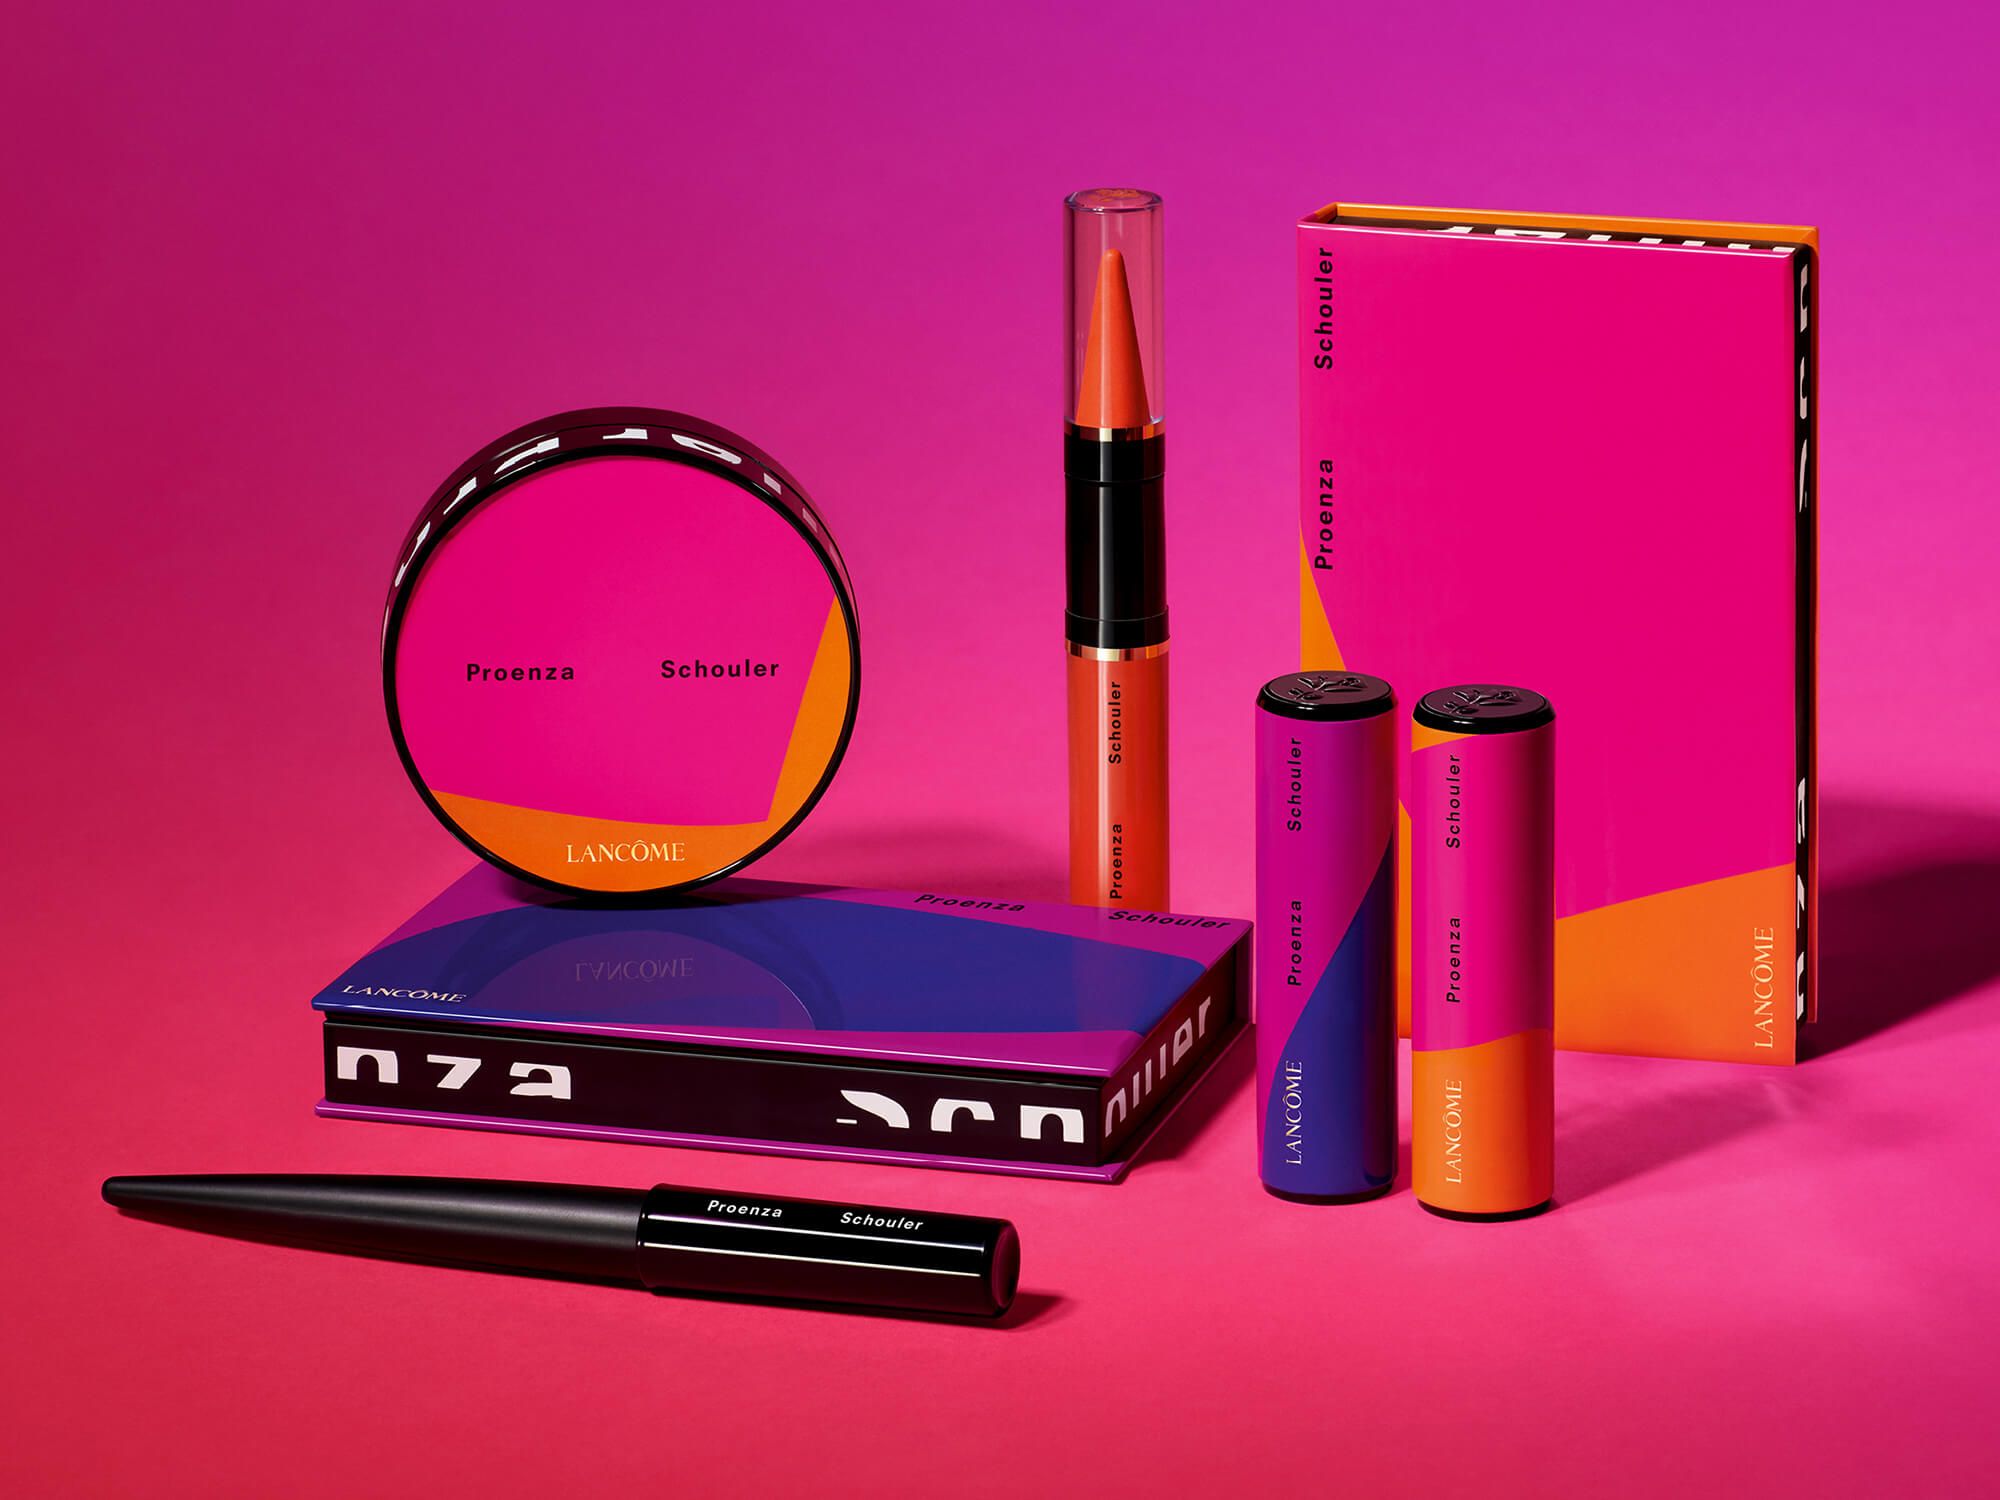 The new collection that’s perfect for mastering bold make-up